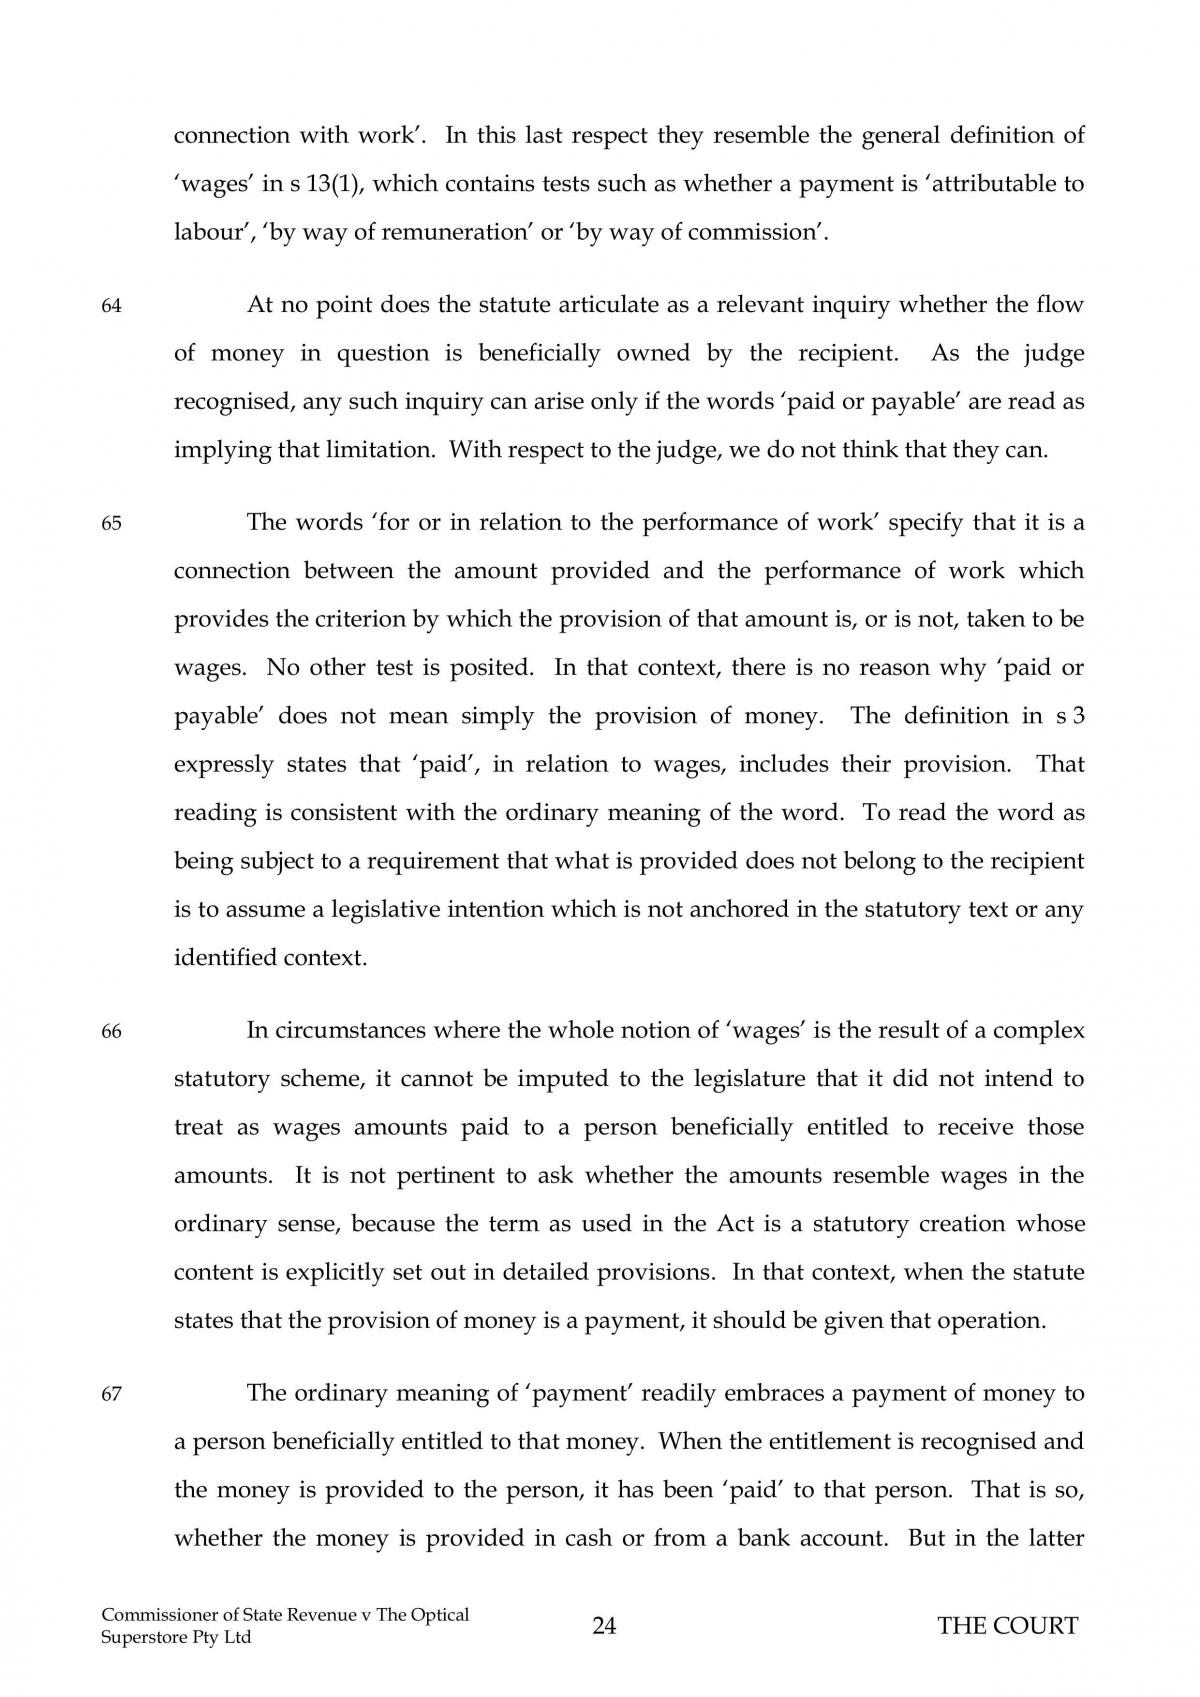 Commissioner Of State Revenue v The Optical Superstore - Page 26